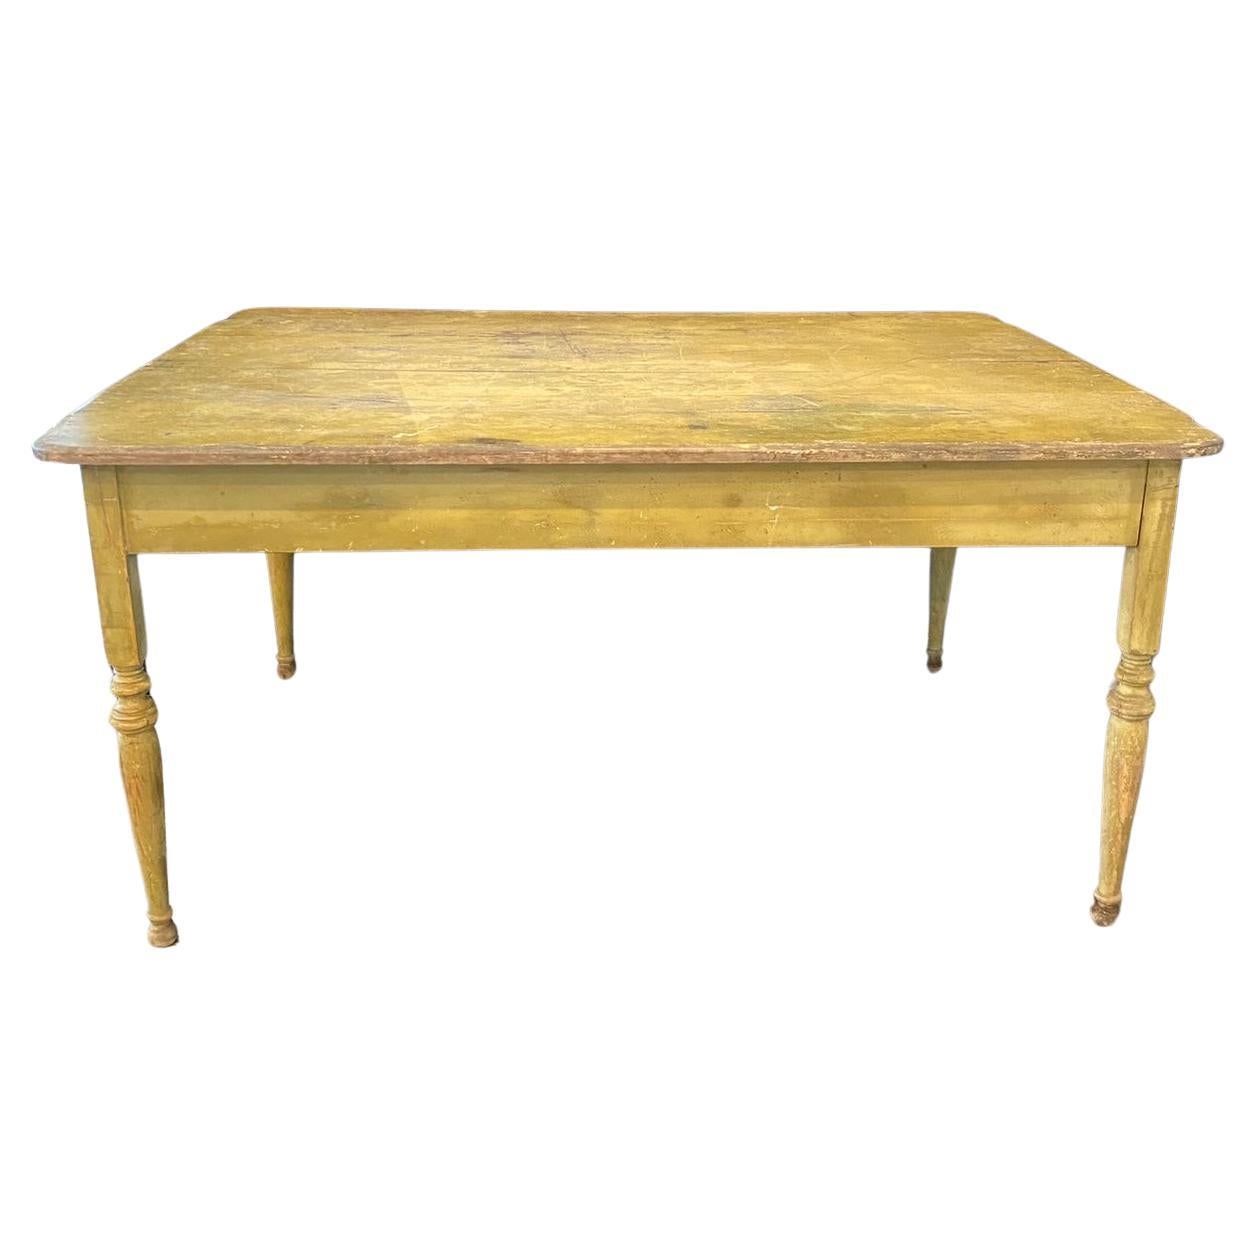 Early 19th Century Americana Primitive Painted Farm Table from Maine For Sale